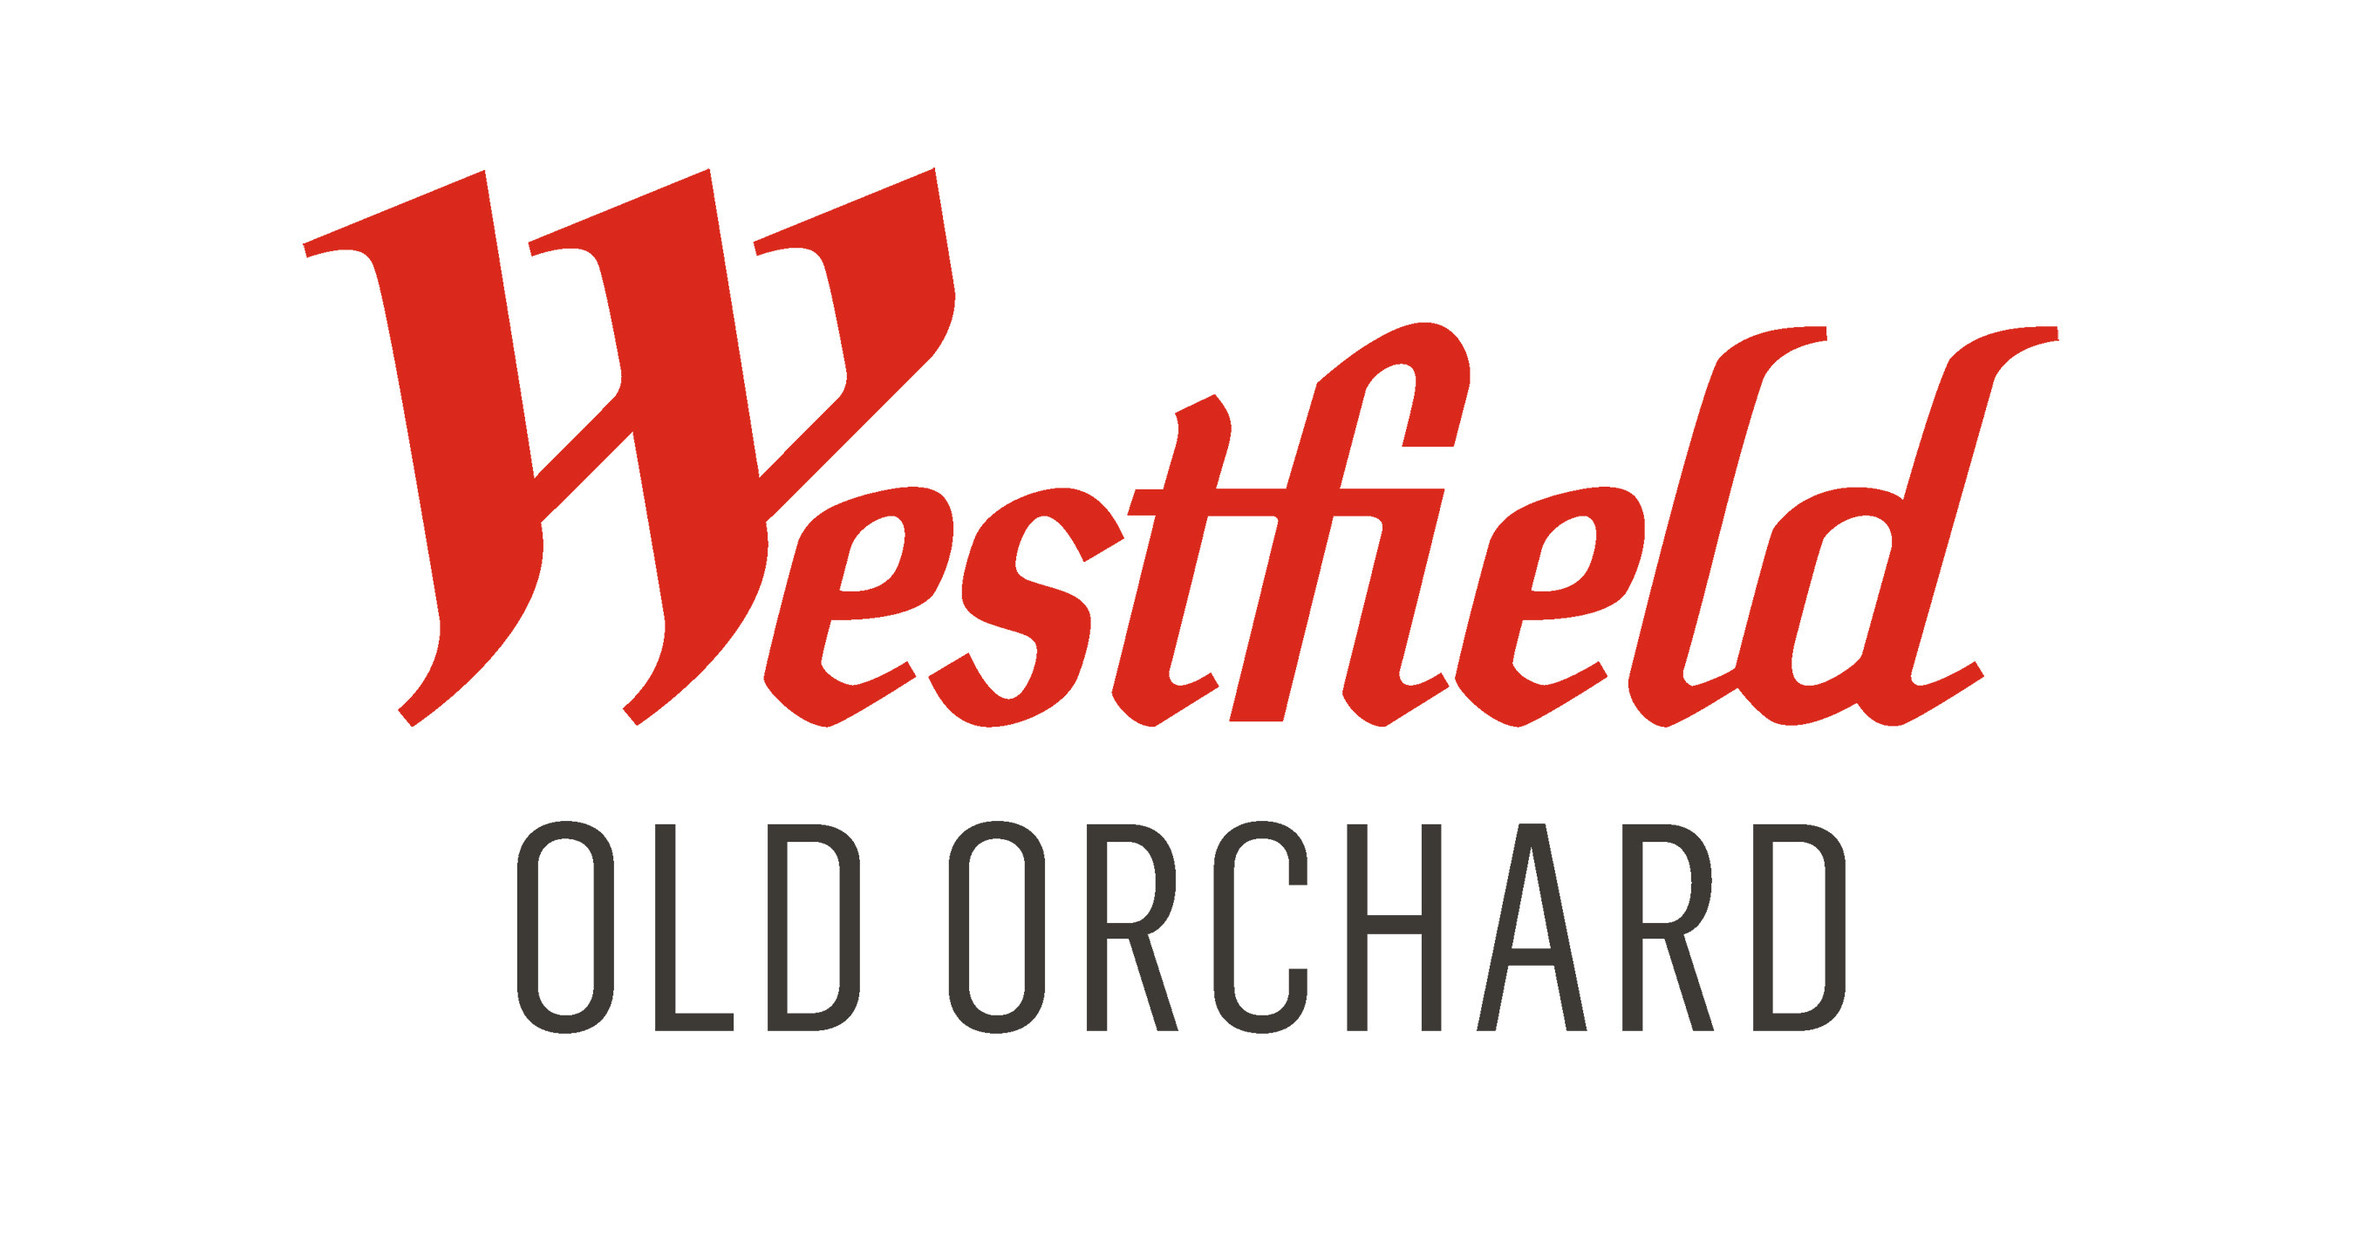 Westfield Old Orchard kicks off the season with Celebrate Summer happenings